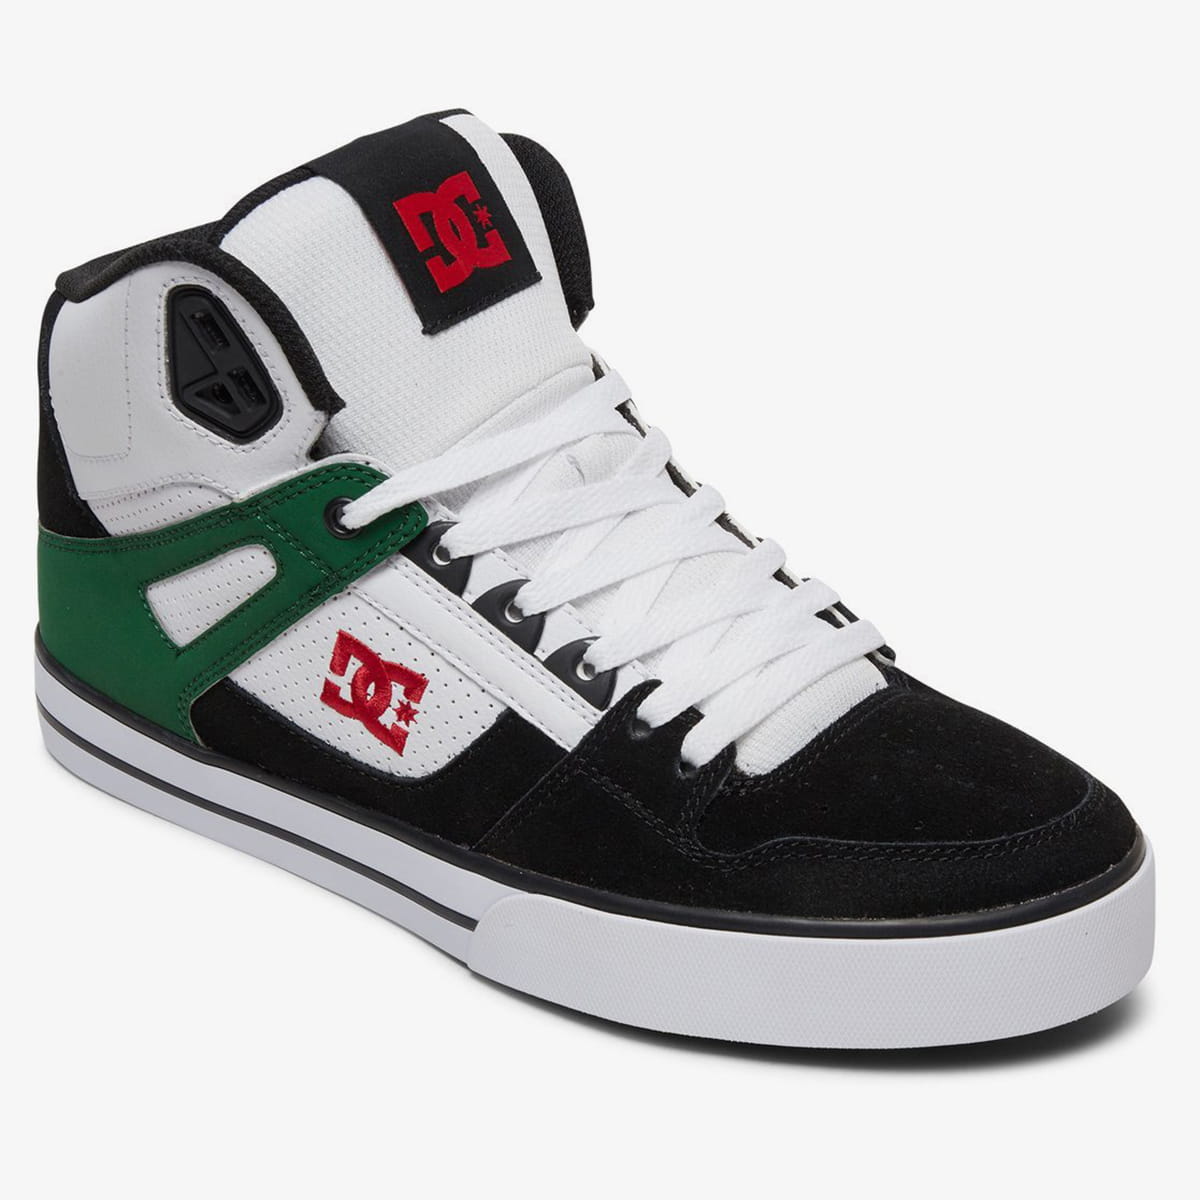 DC Shoes Pure Ht Wc White/Green/Black 